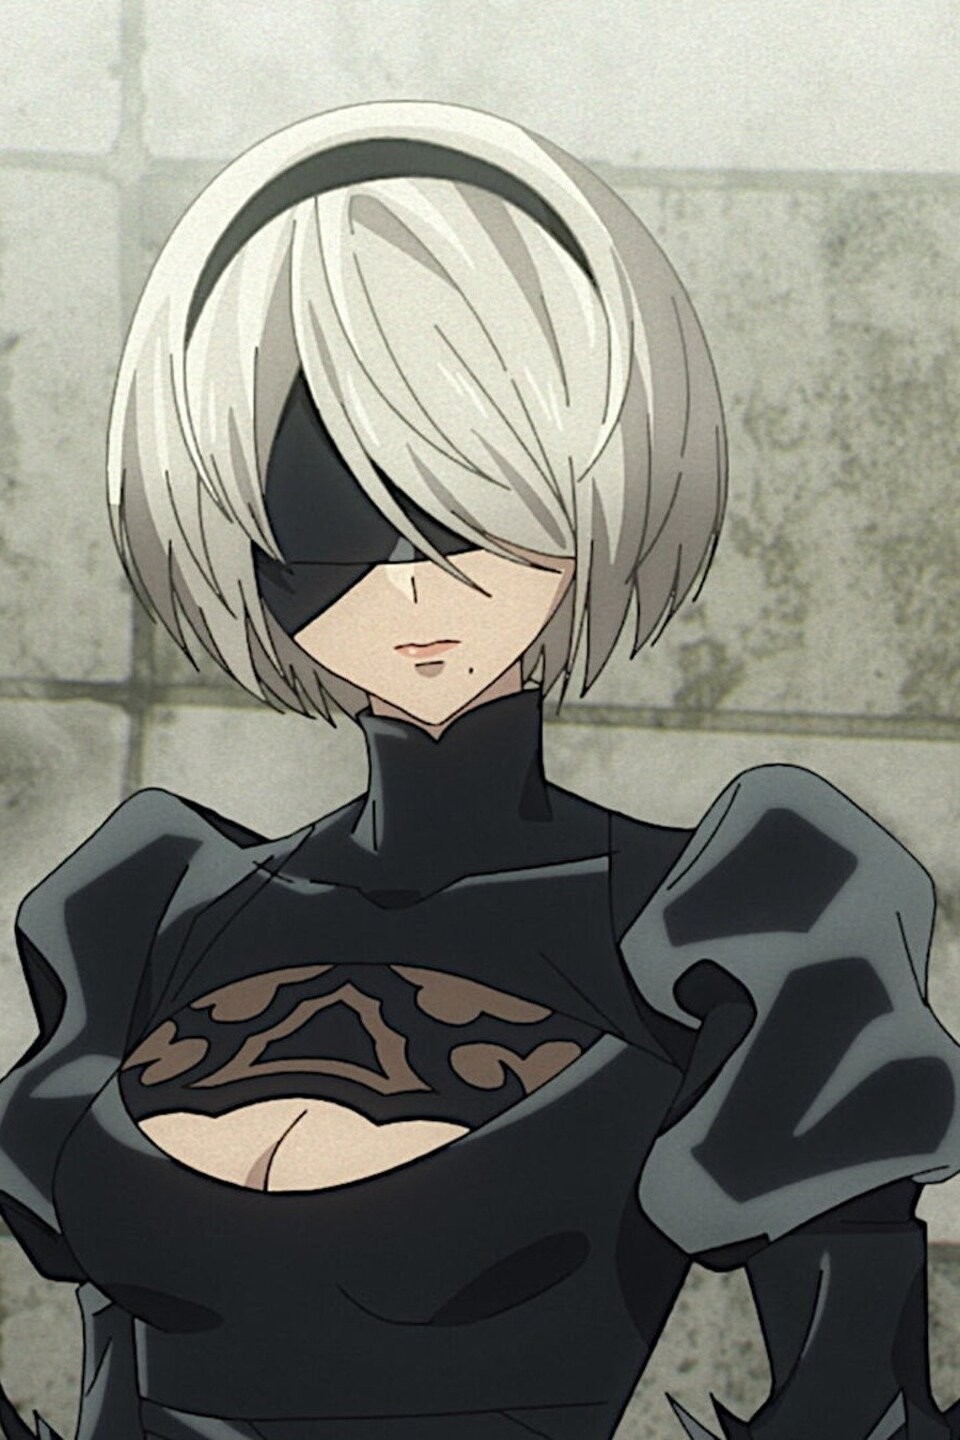 Nier: Automata's Anime Series Gets a First Look